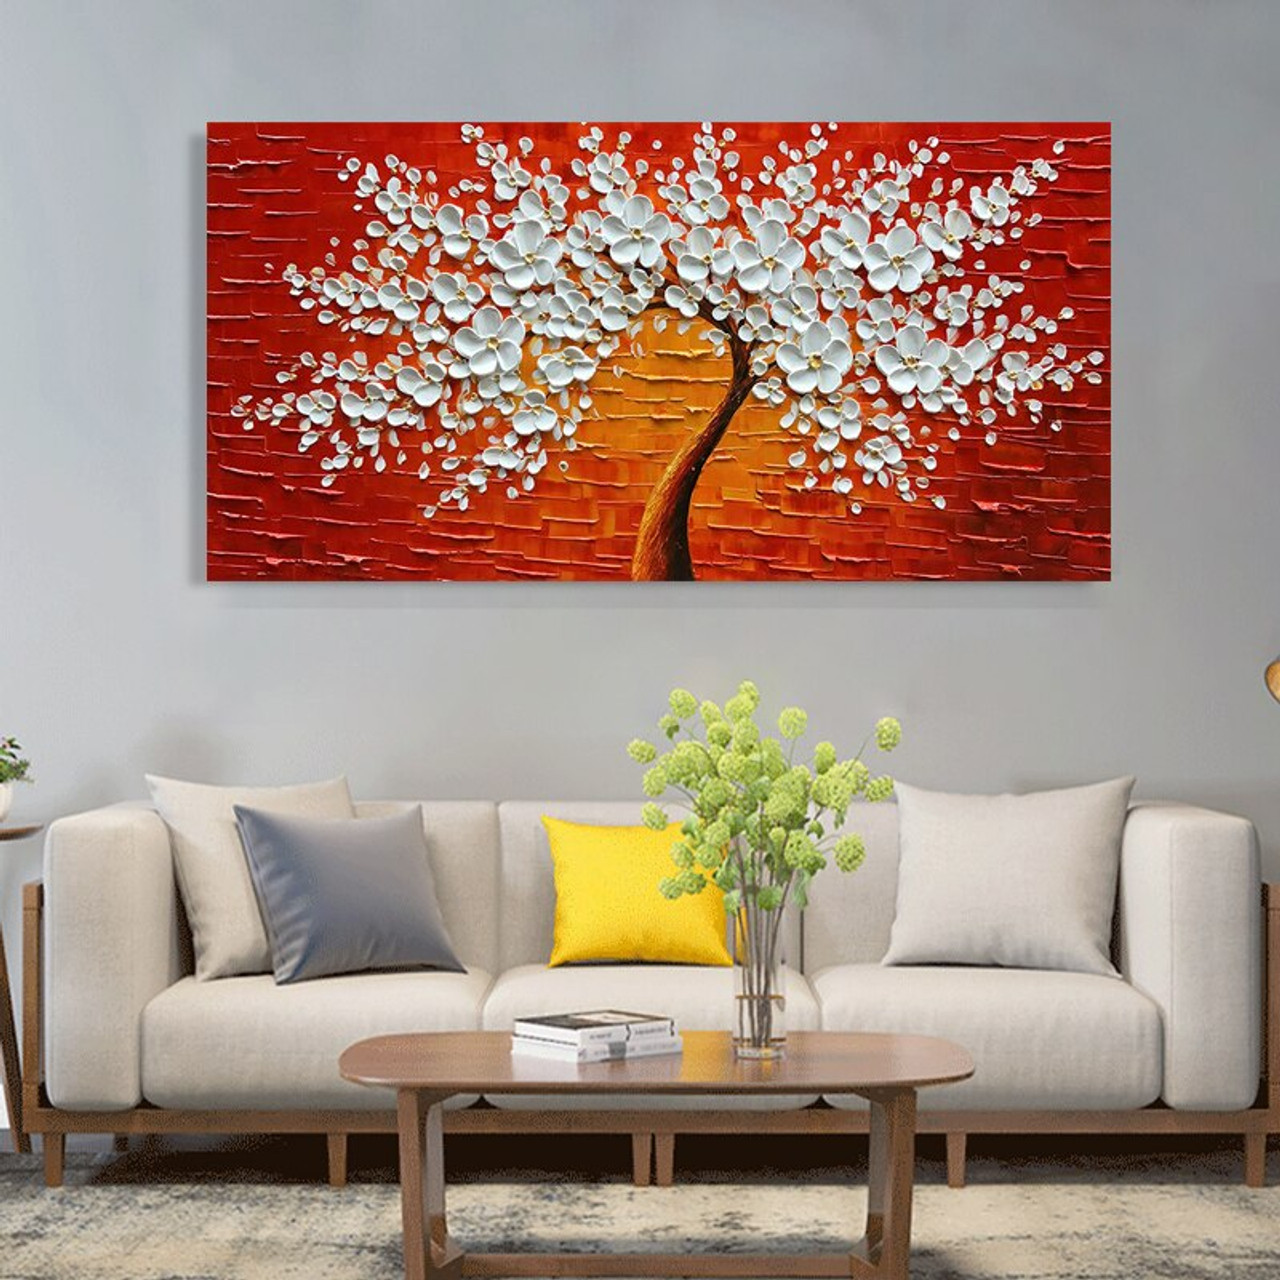 Red Lucky Tree 100 Hand Painted Oil Painting Modern Home Living Room Decorative Wall Art Painting OnshopDealsCom